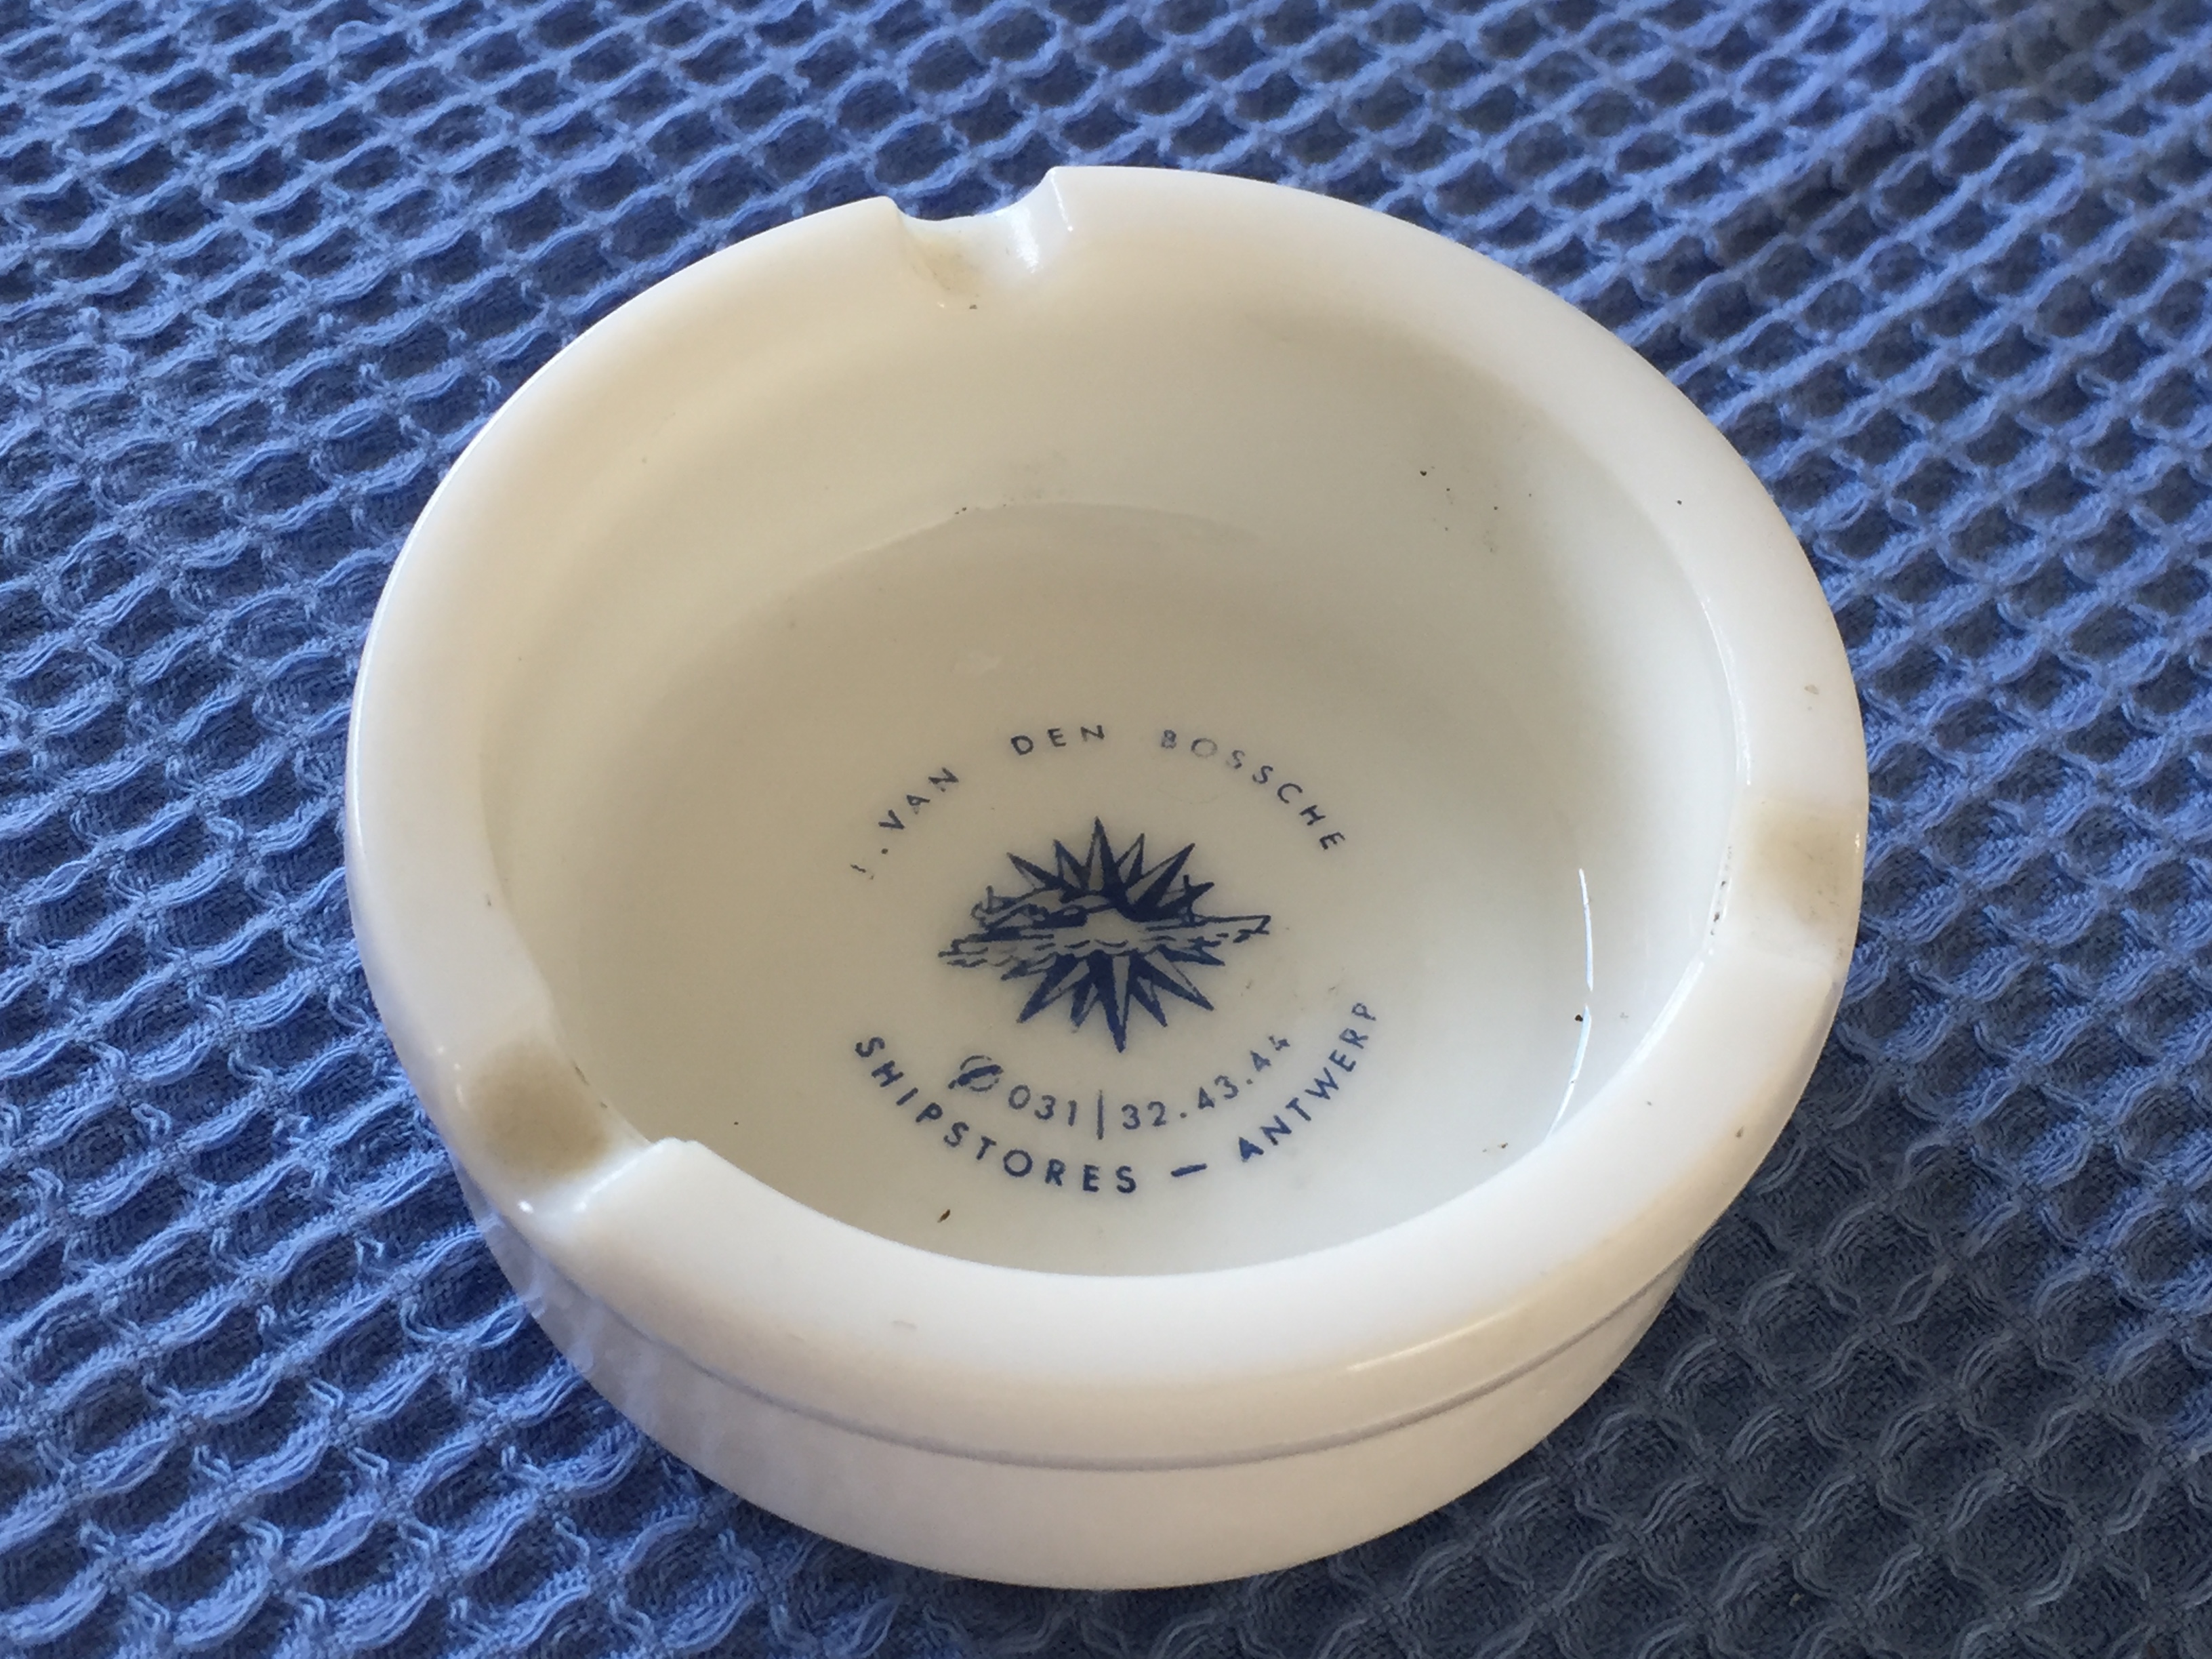 ASHTRAY FROM THE VAN DEN BOSSCHE SHIPPING COMPANY ANTWERP